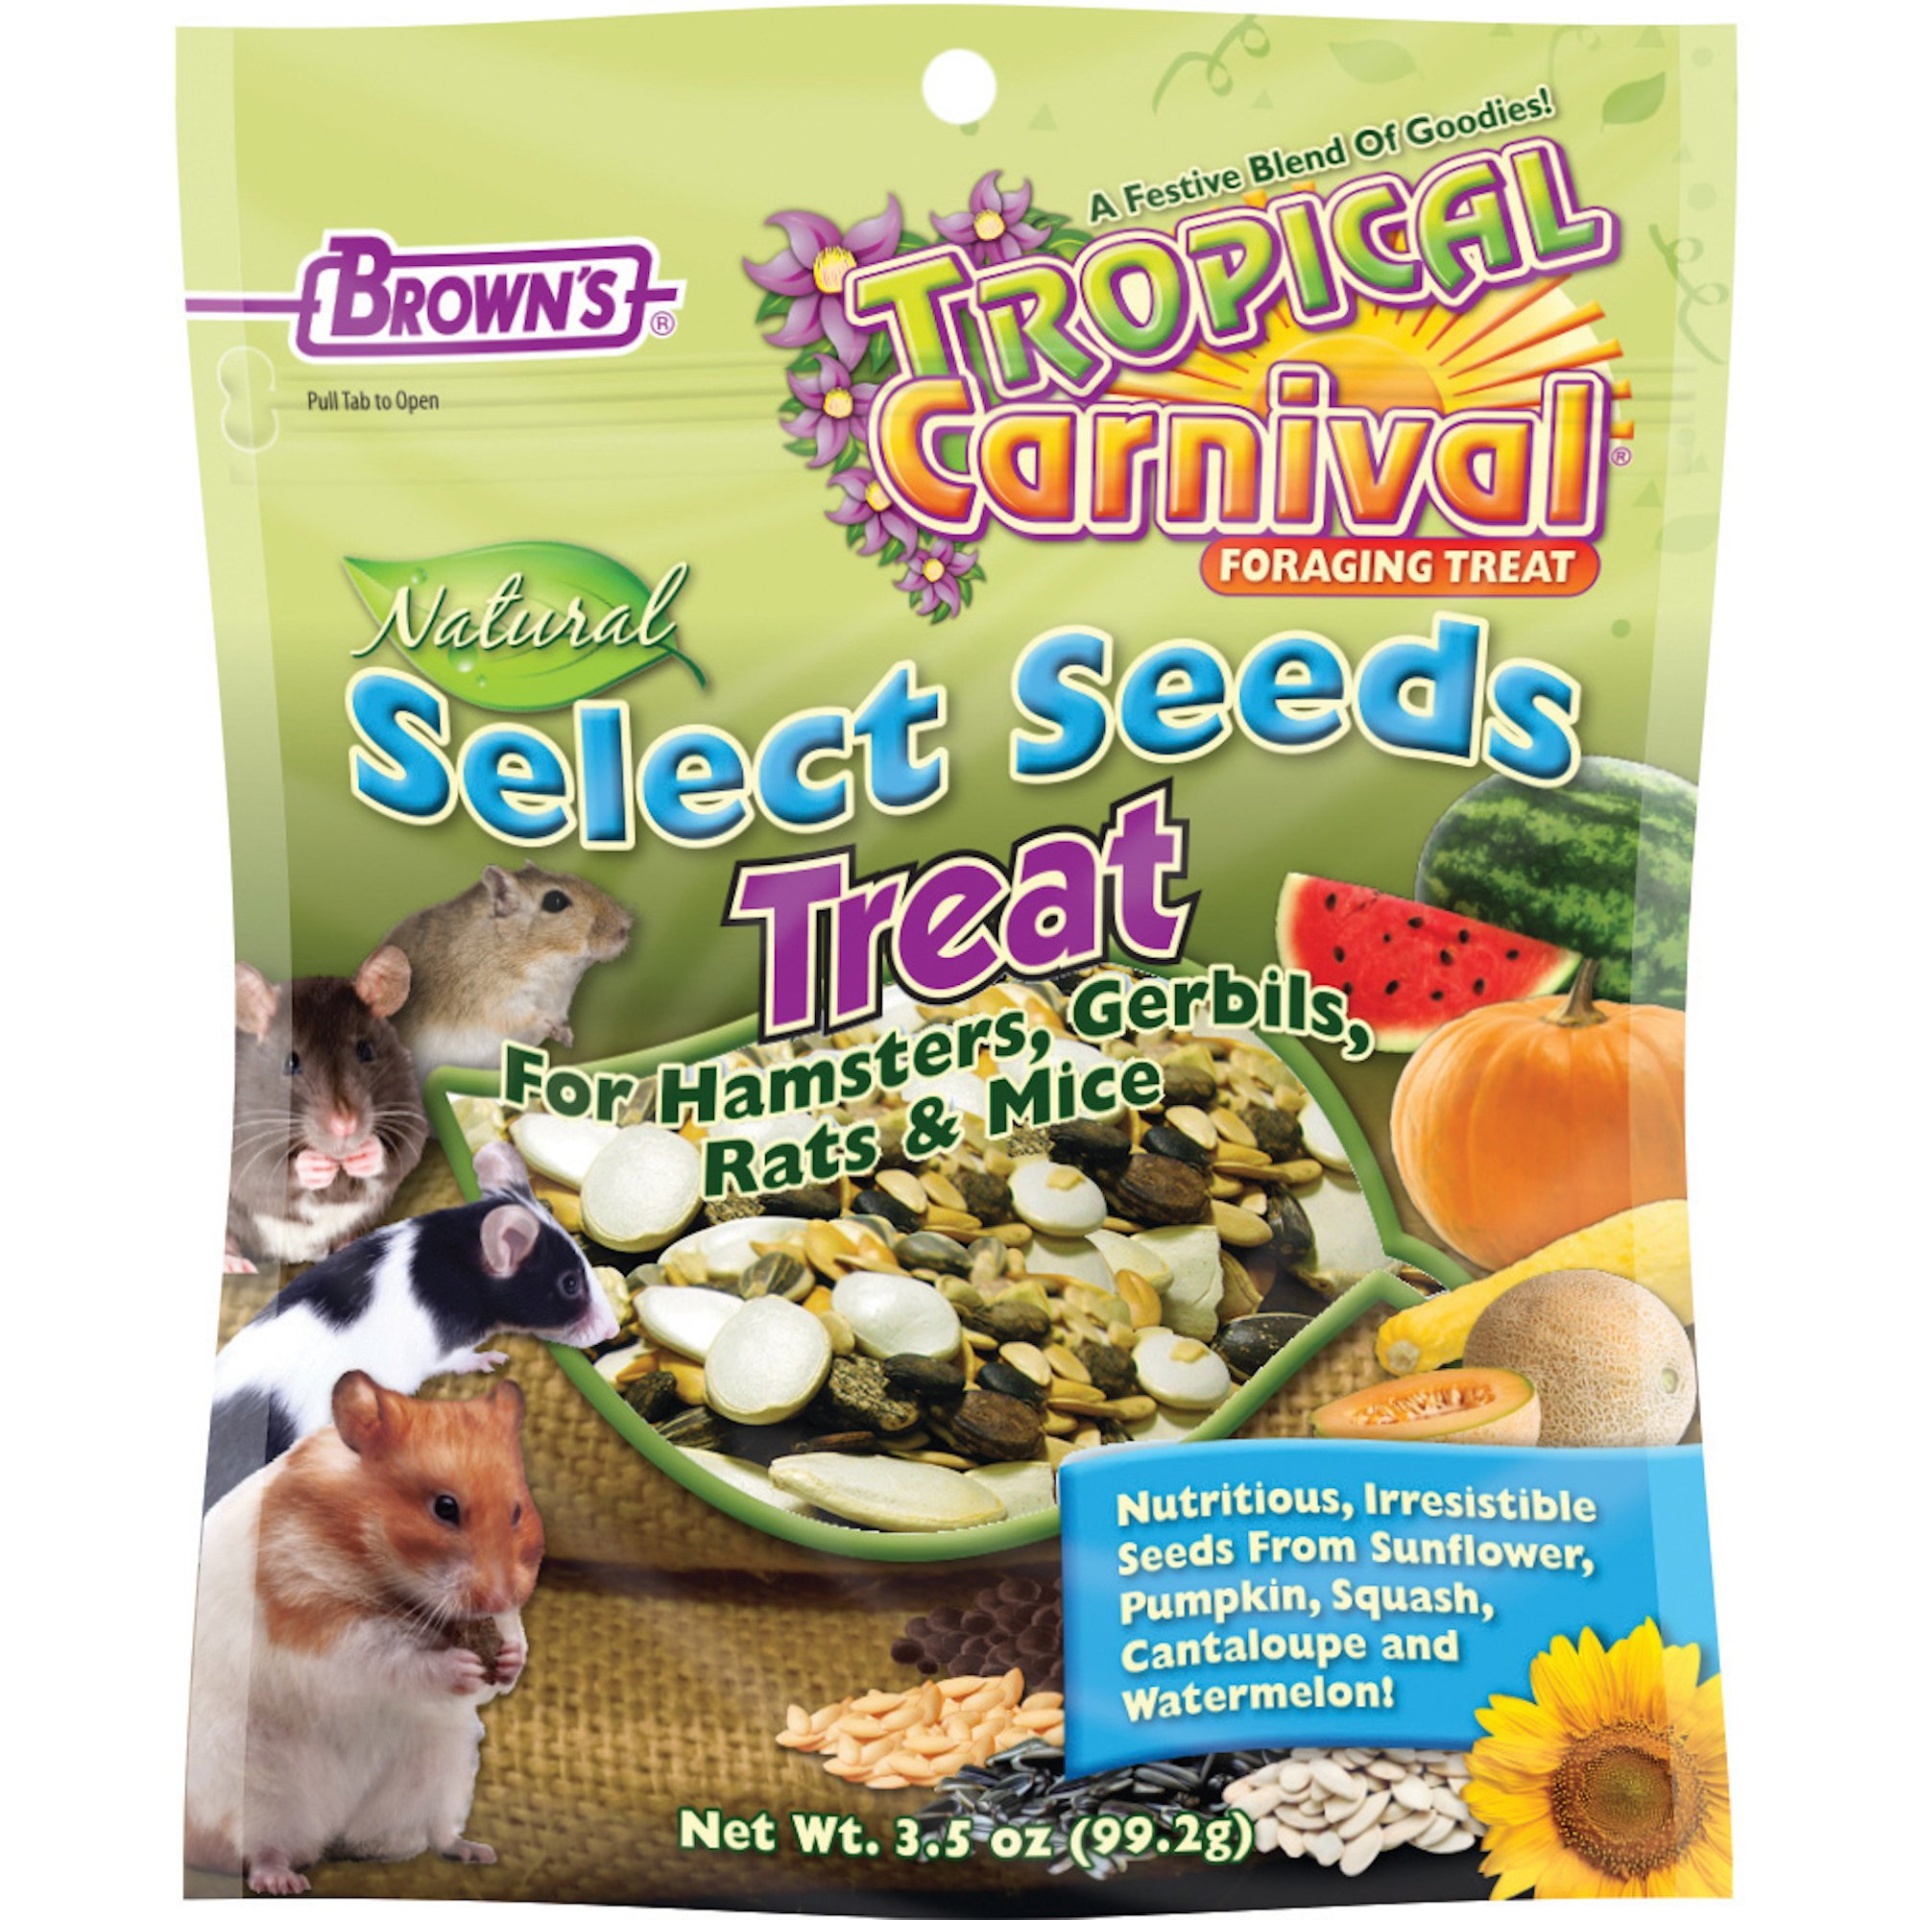 slide 1 of 1, Brown's Tropical Carnival Natural Select Seeds Treat, 3.5 oz